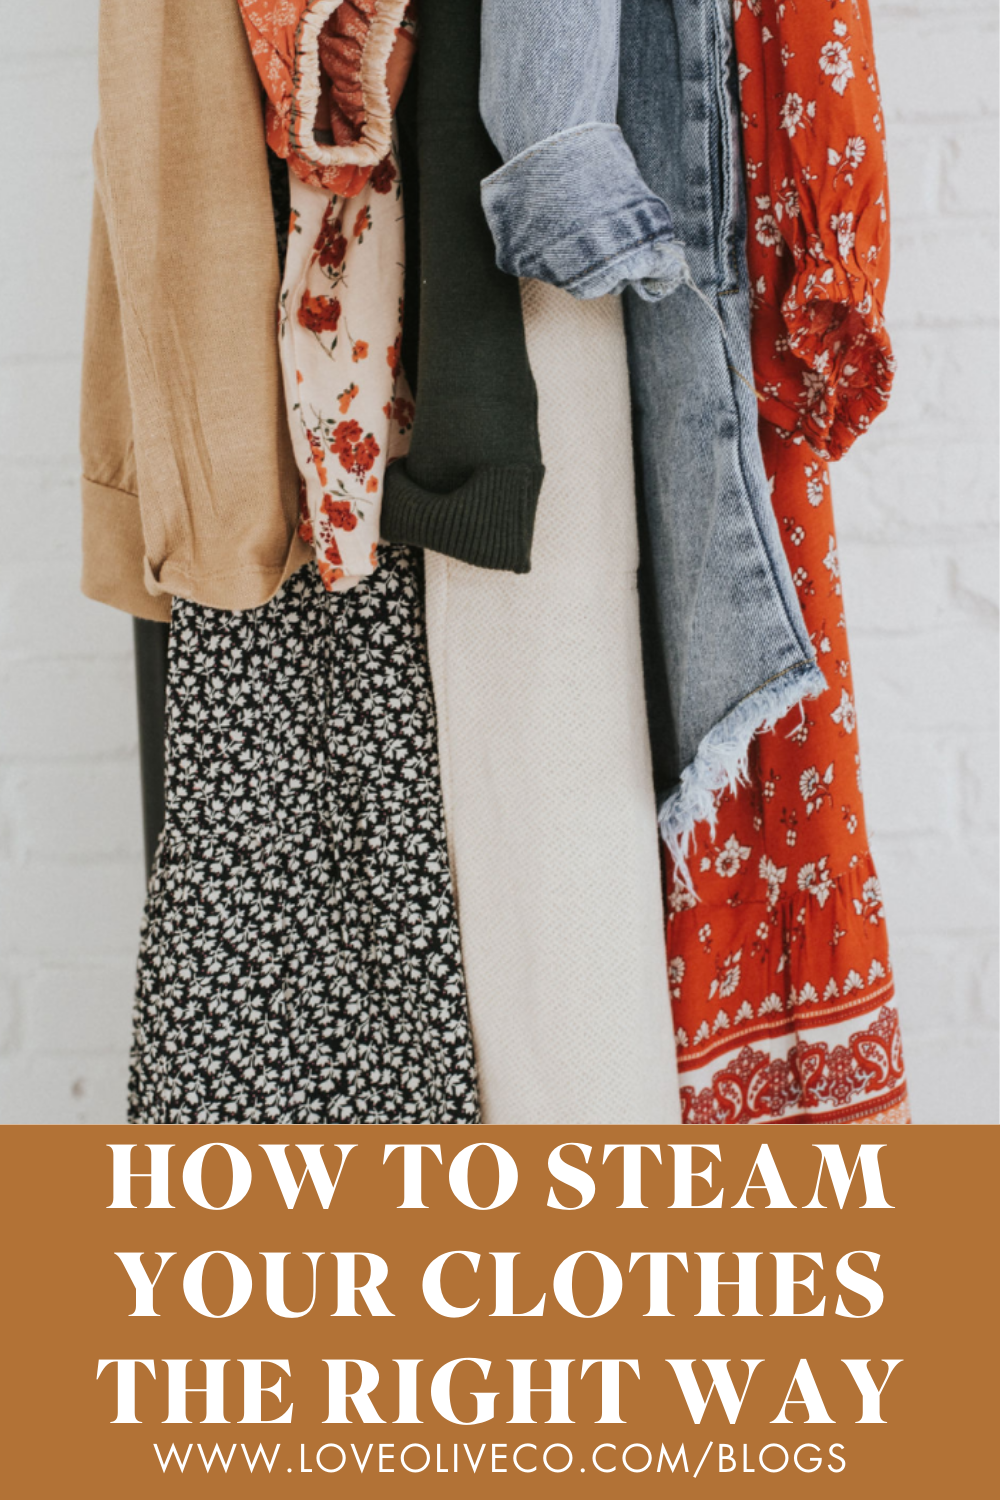 How to Steam Your Clothes the Right Way www.loveoliveco.com